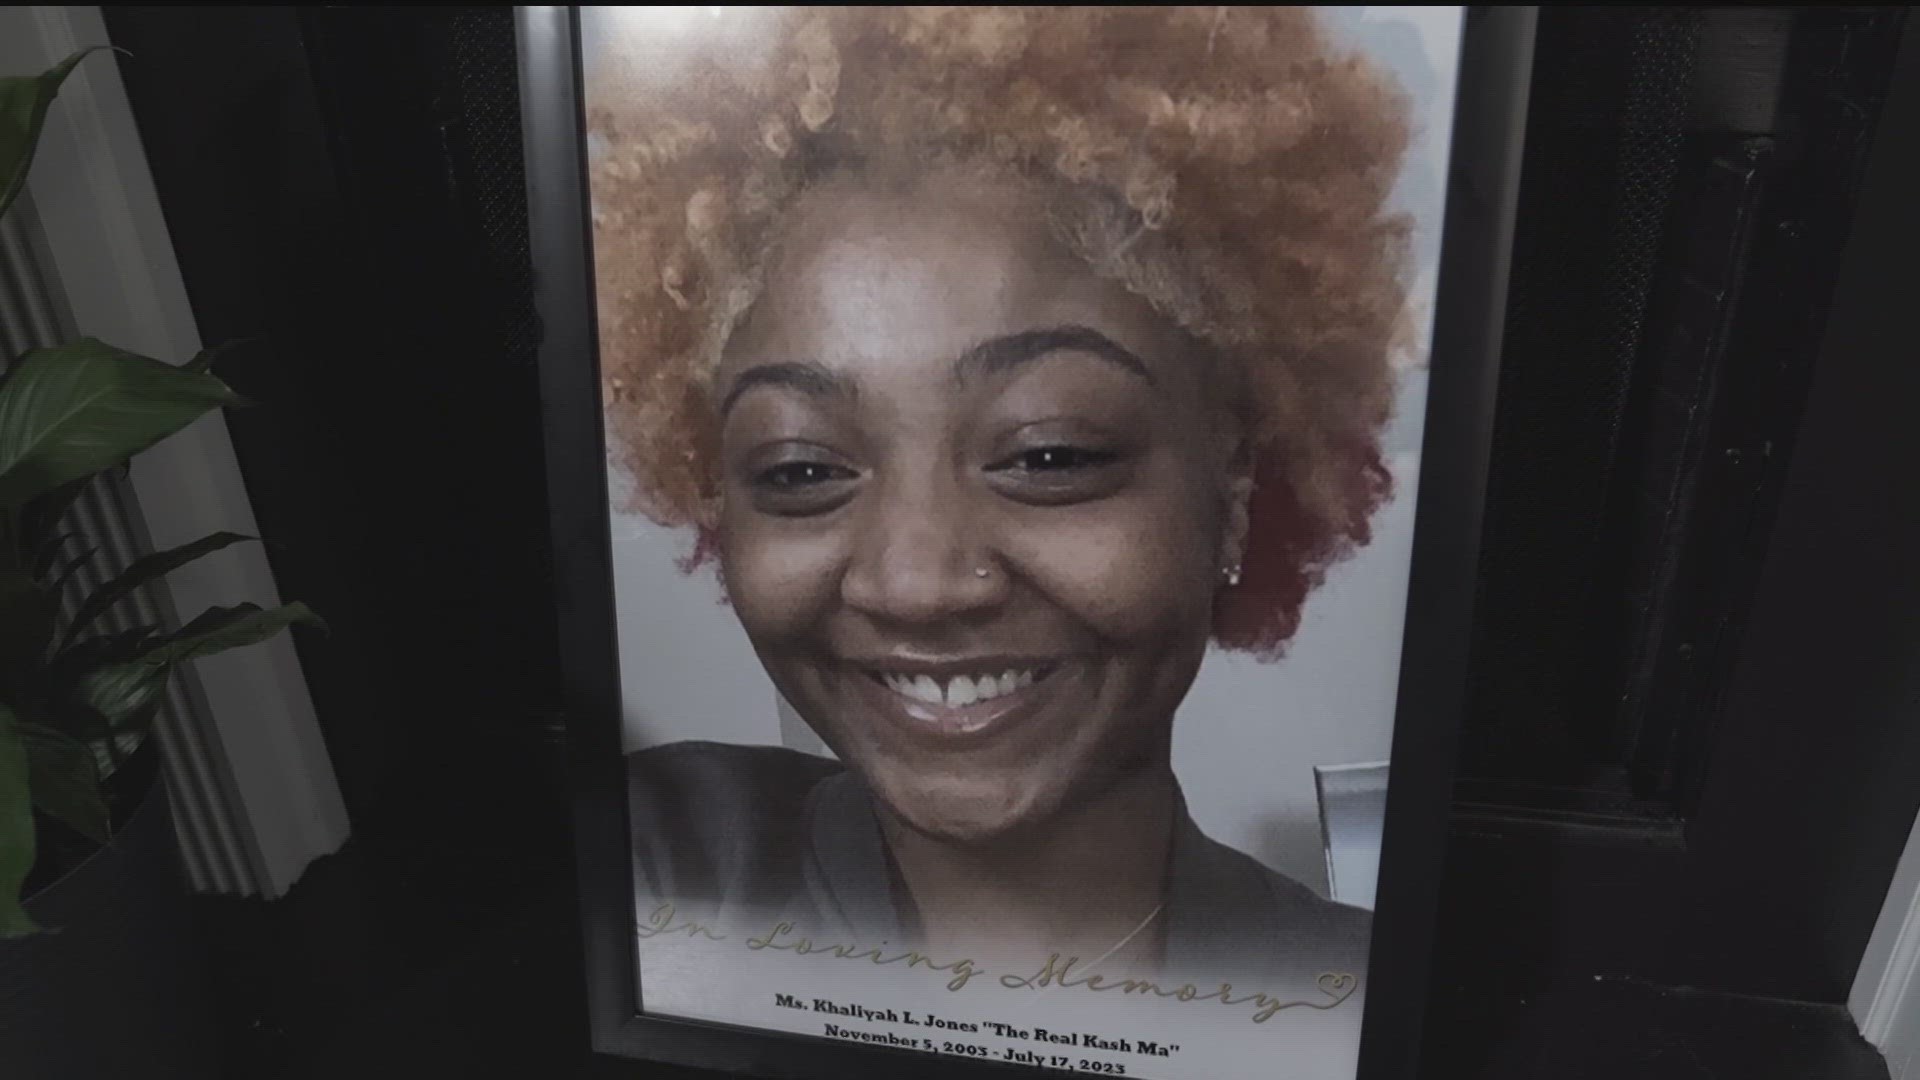 Her family says if her alleged killer had remained behind bars, she'd still be alive.